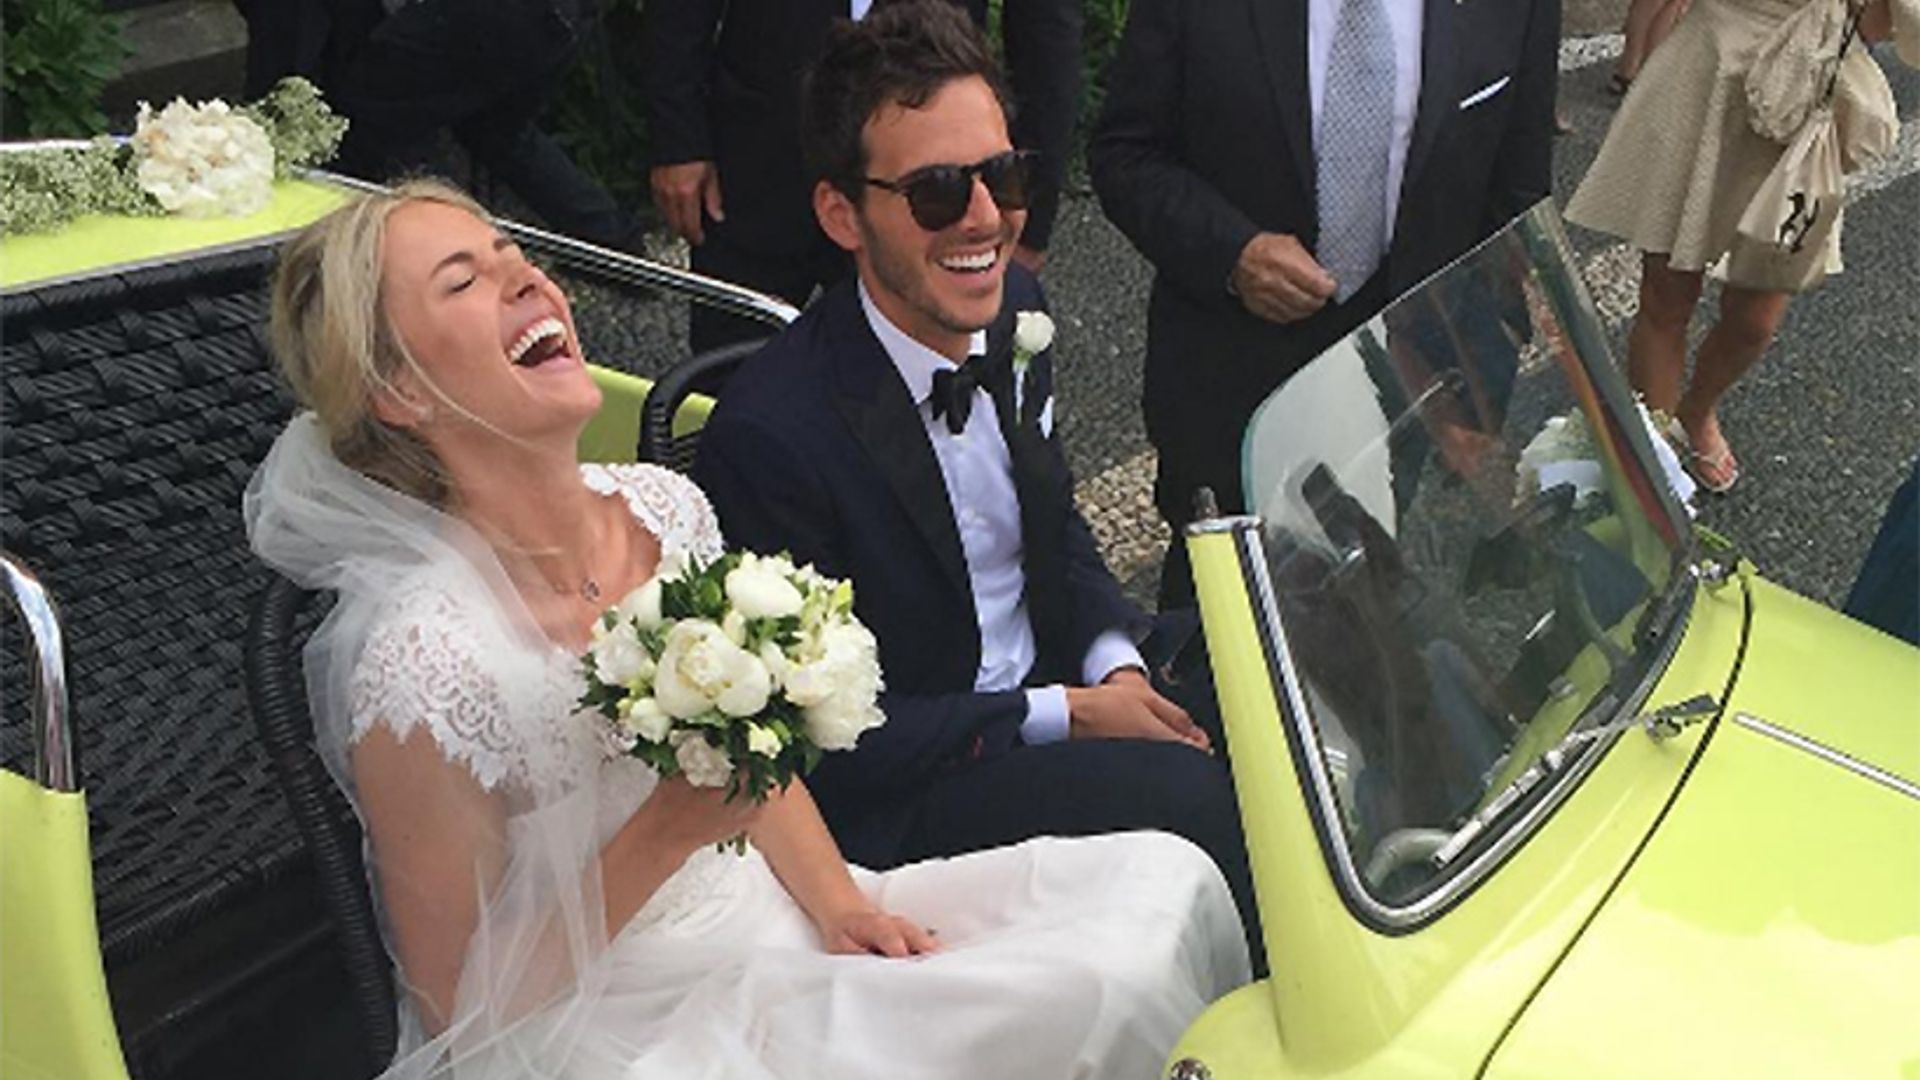 Former Hollyoaks star Scarlett Bowman ties the knot in Italy – see her romantic dress 